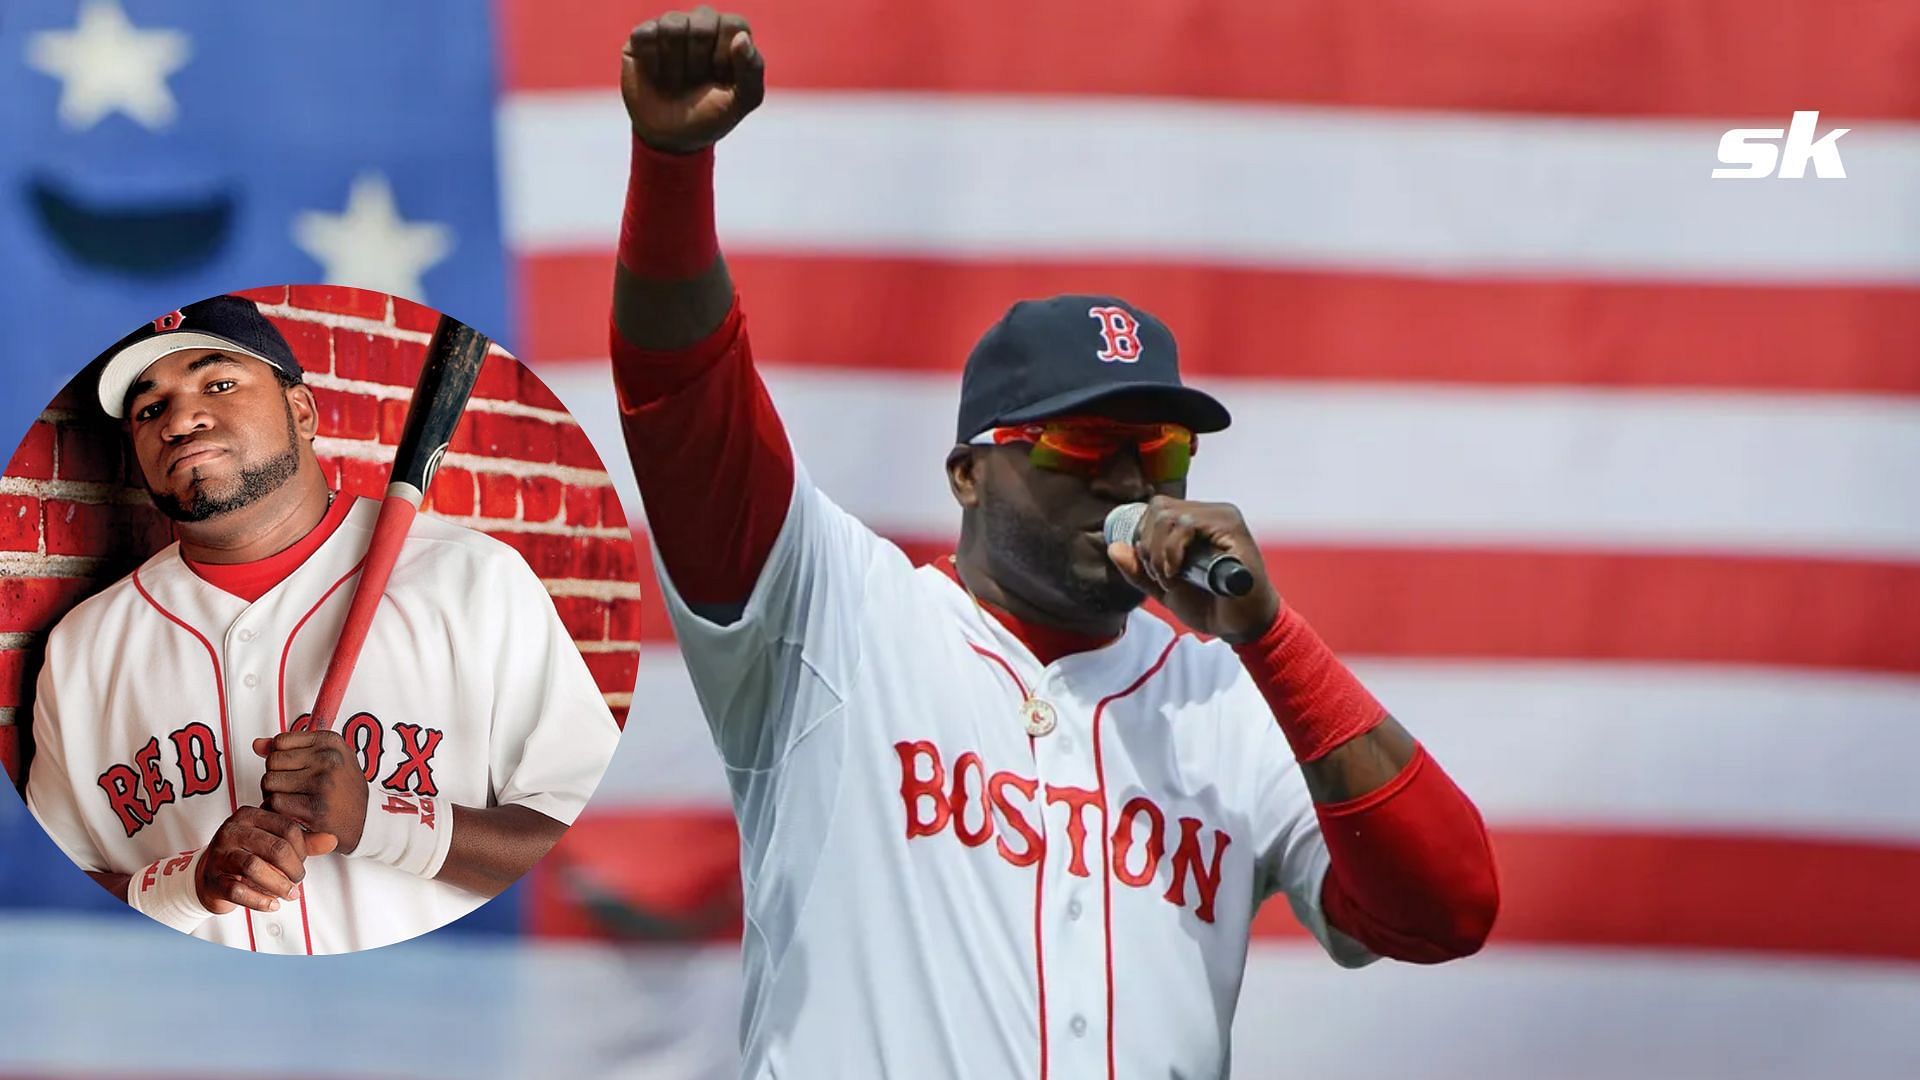 Hall Of Famer David Ortiz at the Fenway Park delivering his epic speech in the aftermath of aftermath of Boston Marathon Bombing.  